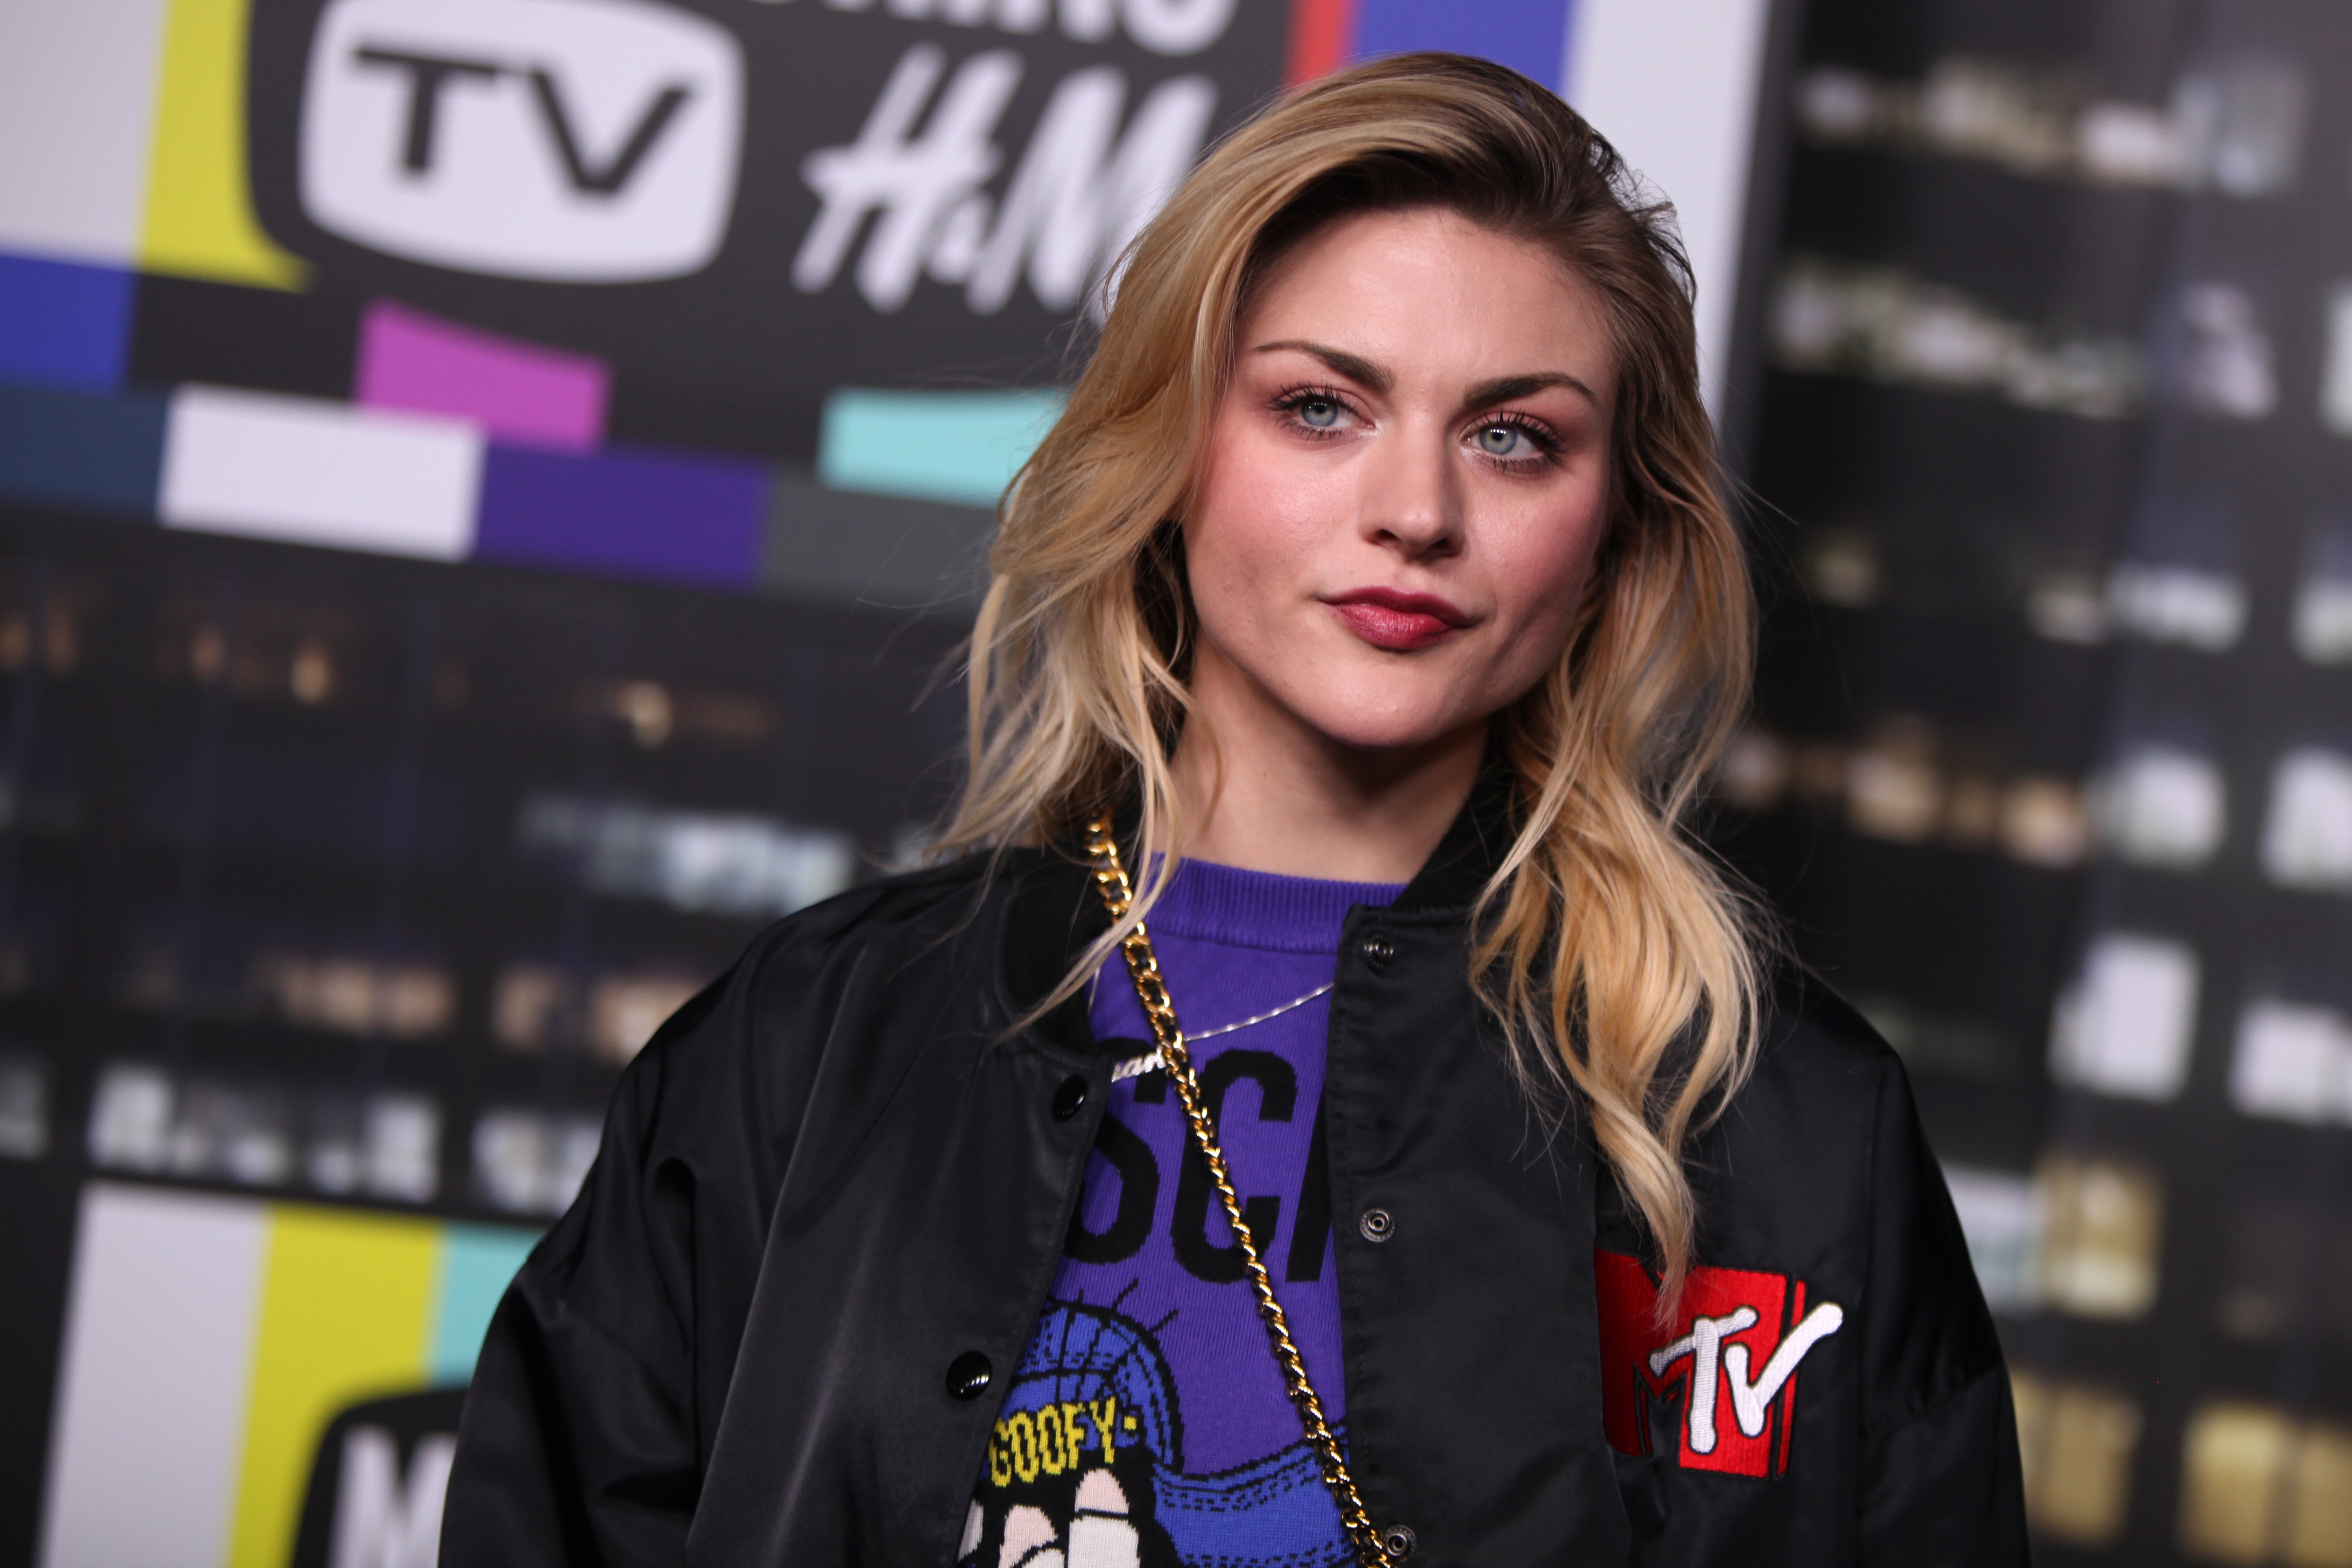 Frances Bean Cobain at the Moschino x H&M show in New York, on October 24, 2018. | Source: Getty Images